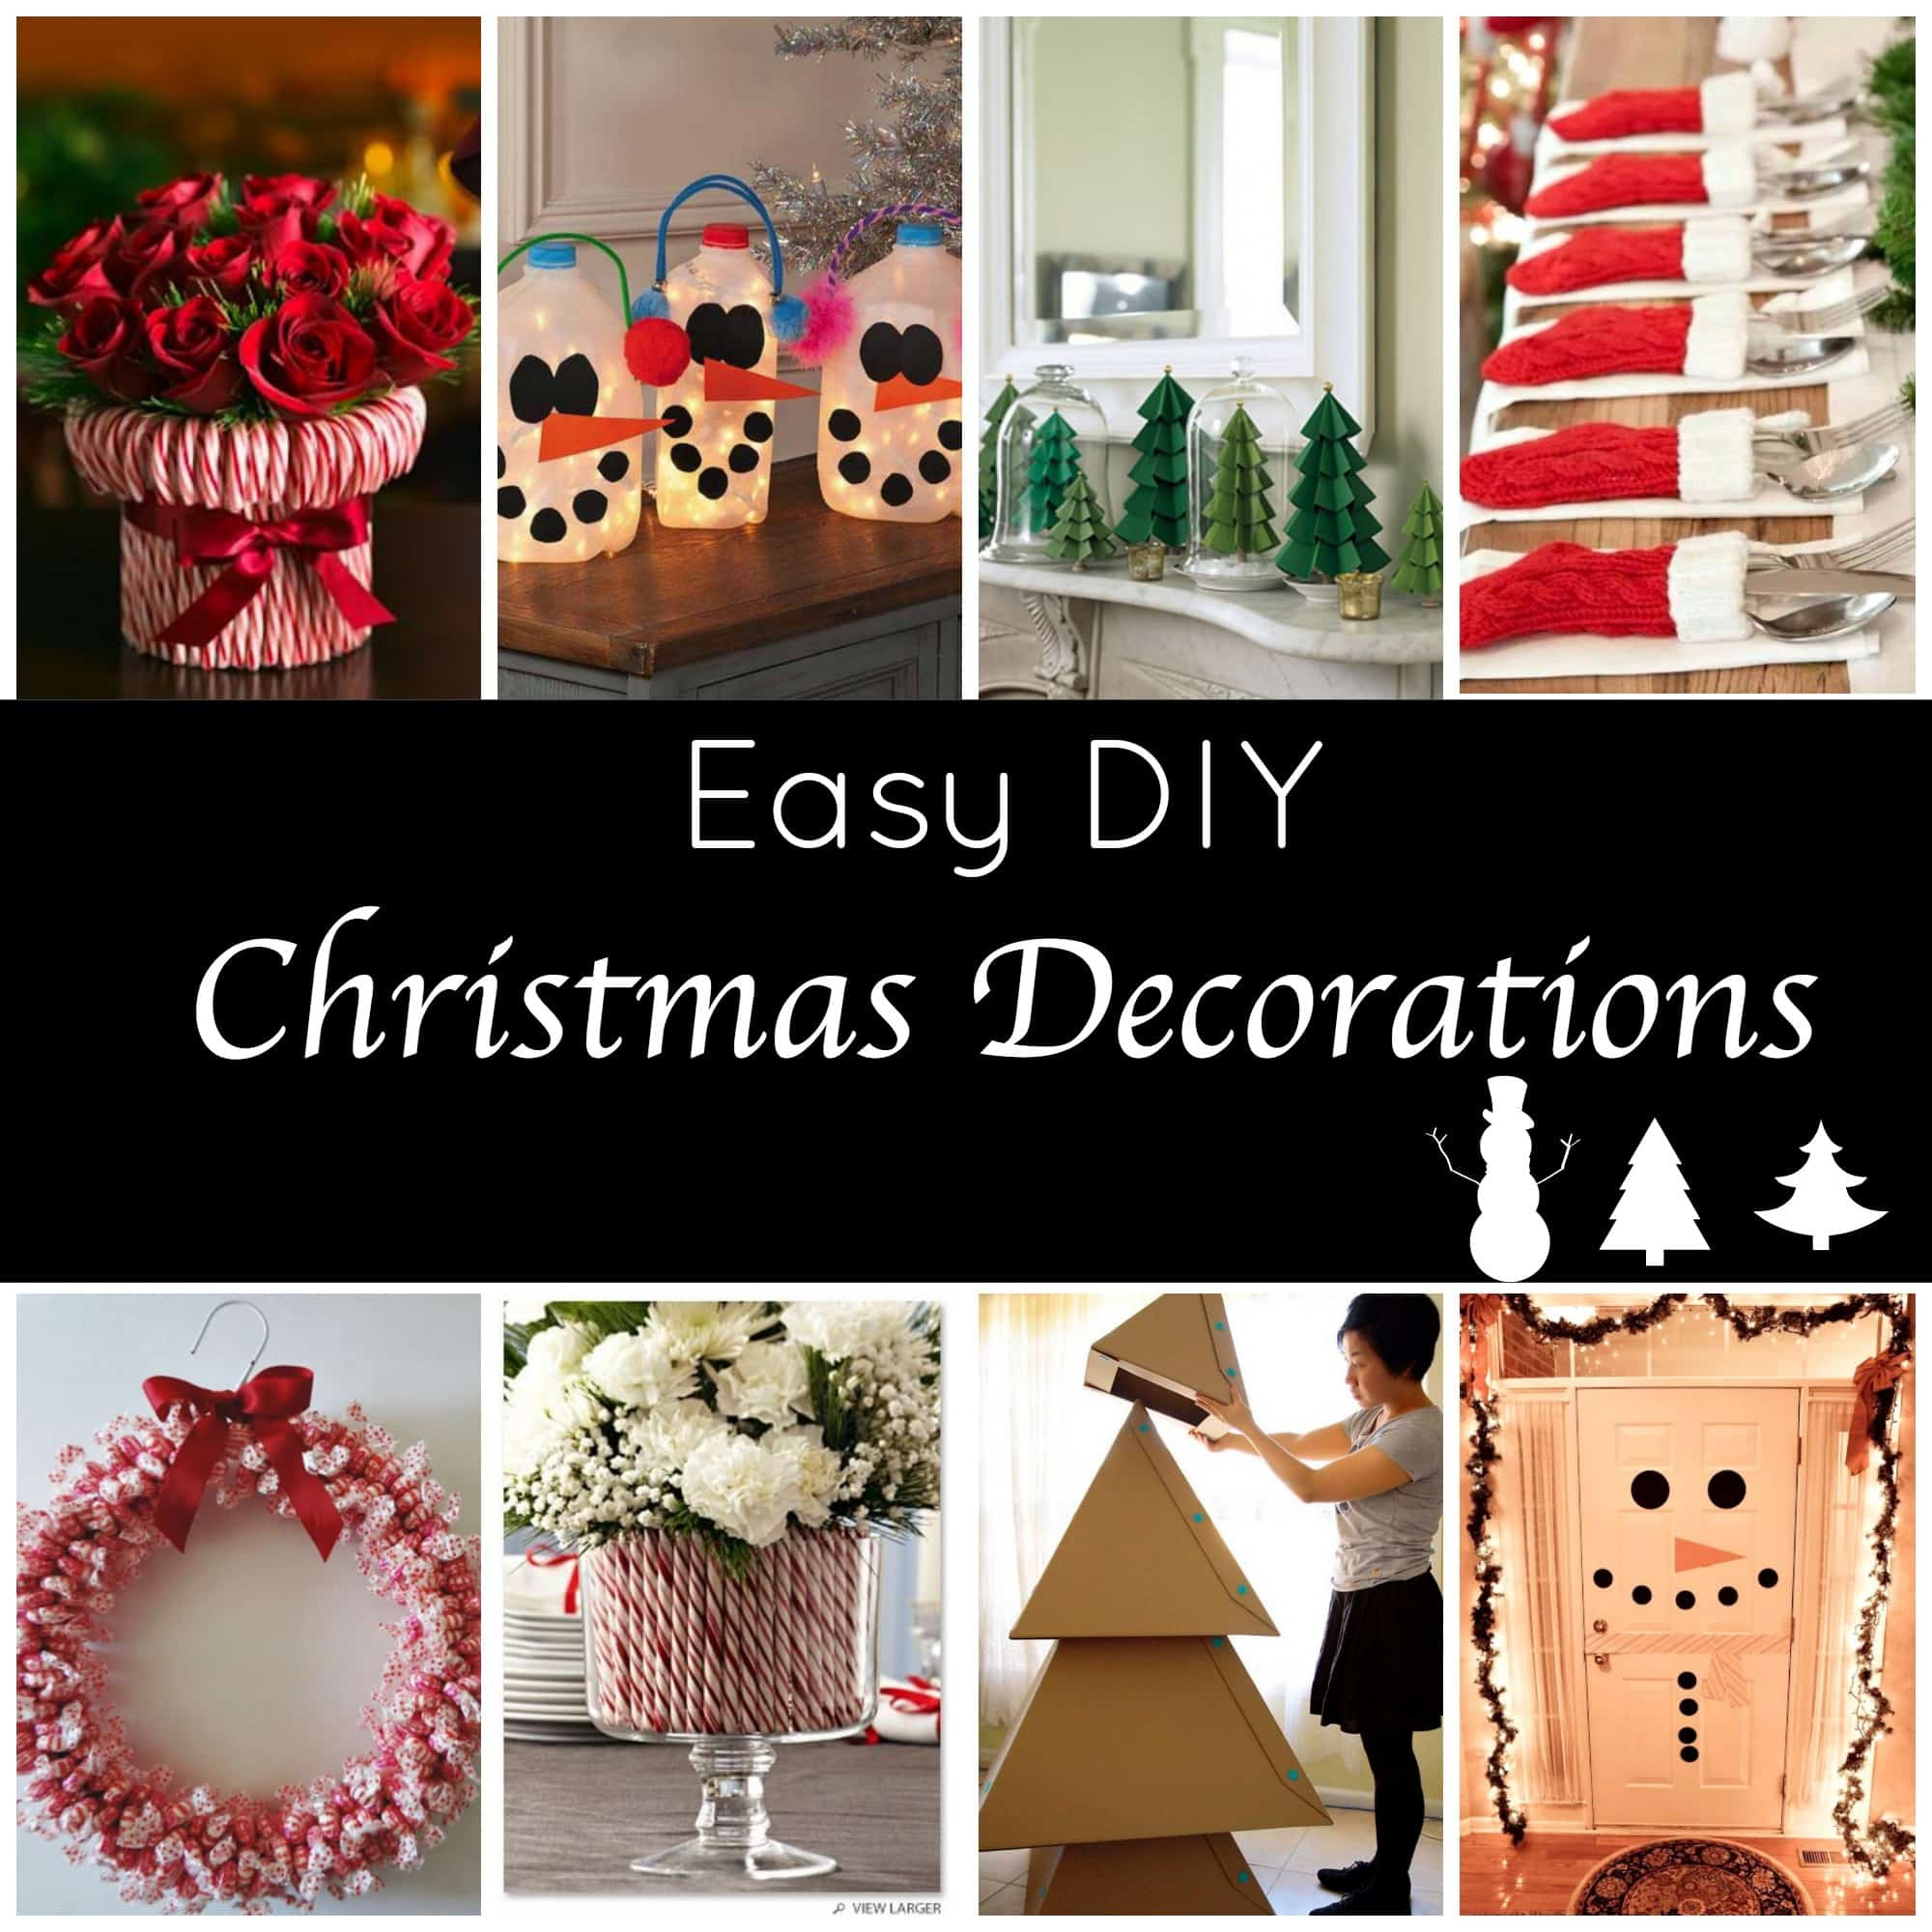 Christmas DIY Ideas
 Cute and Easy DIY Holiday Decorations for a Festive Home